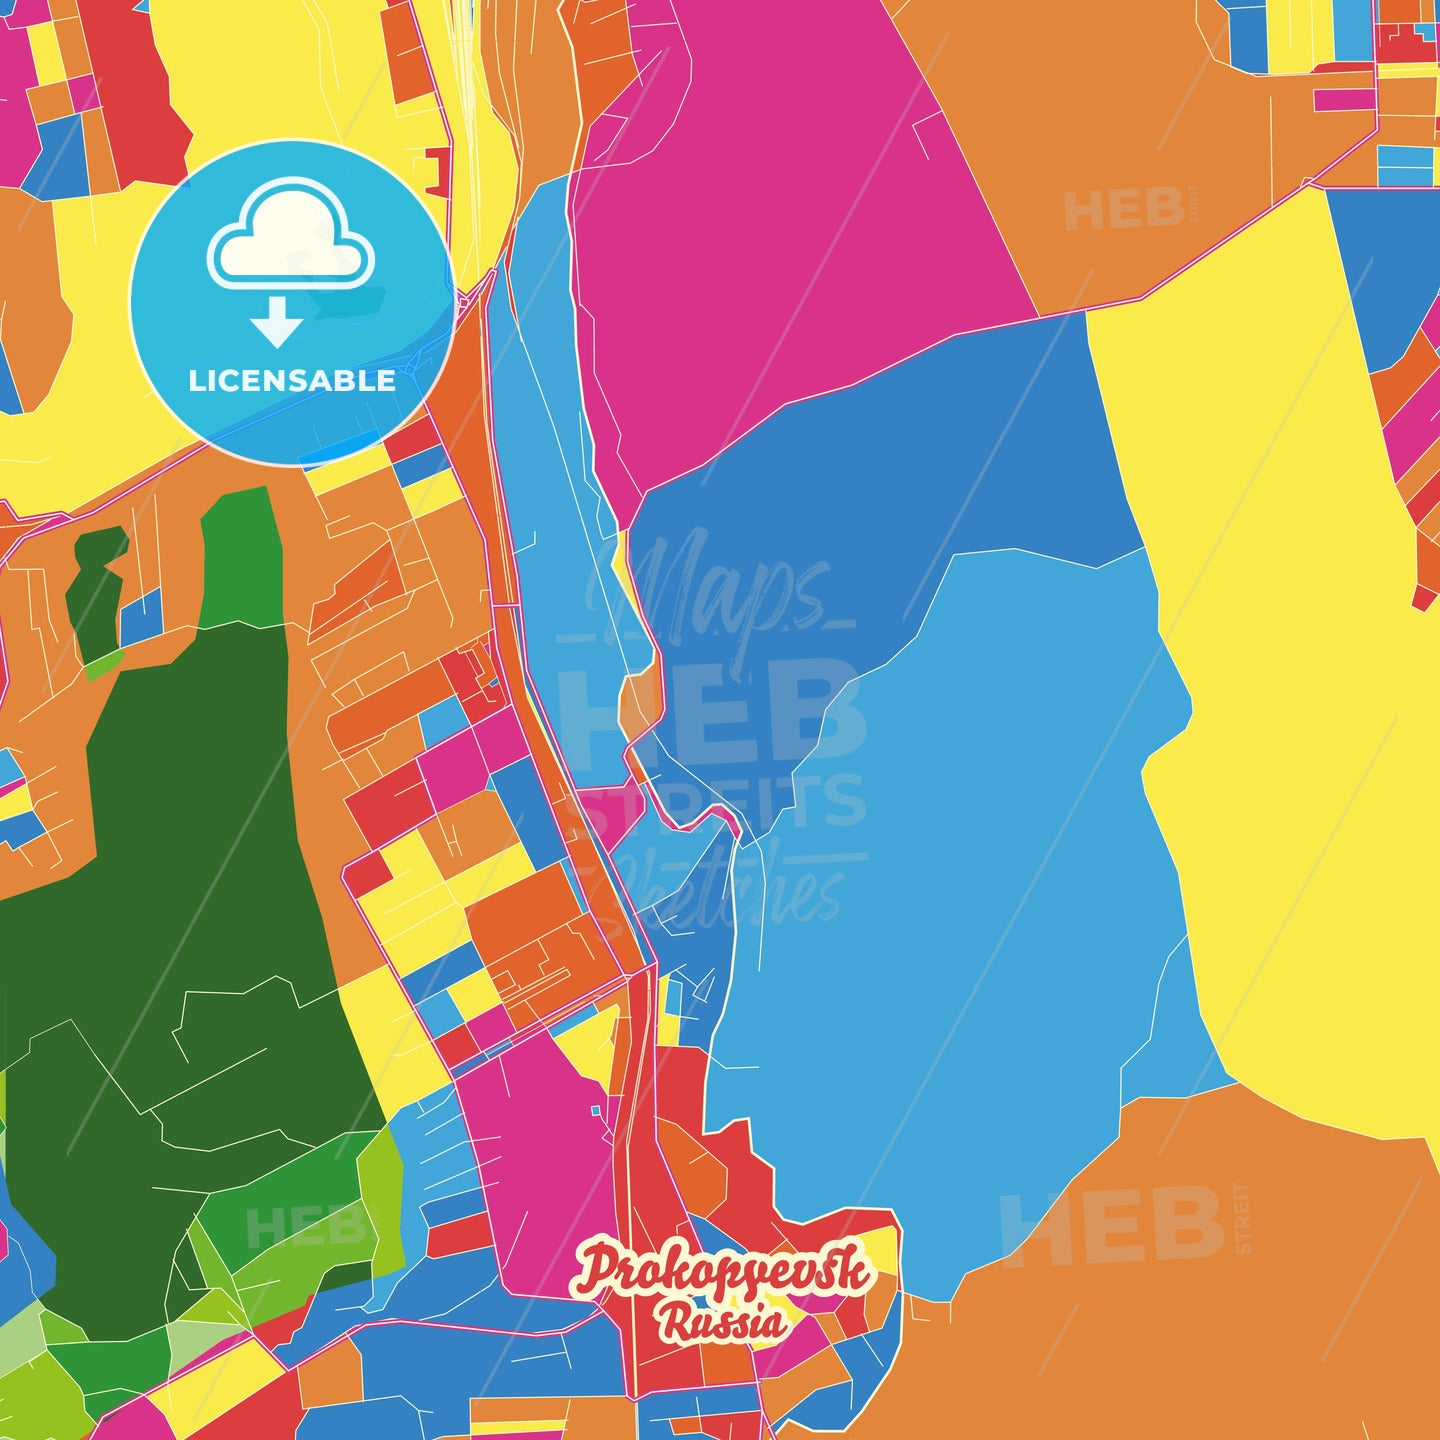 Prokopyevsk, Russia Crazy Colorful Street Map Poster Template - HEBSTREITS Sketches